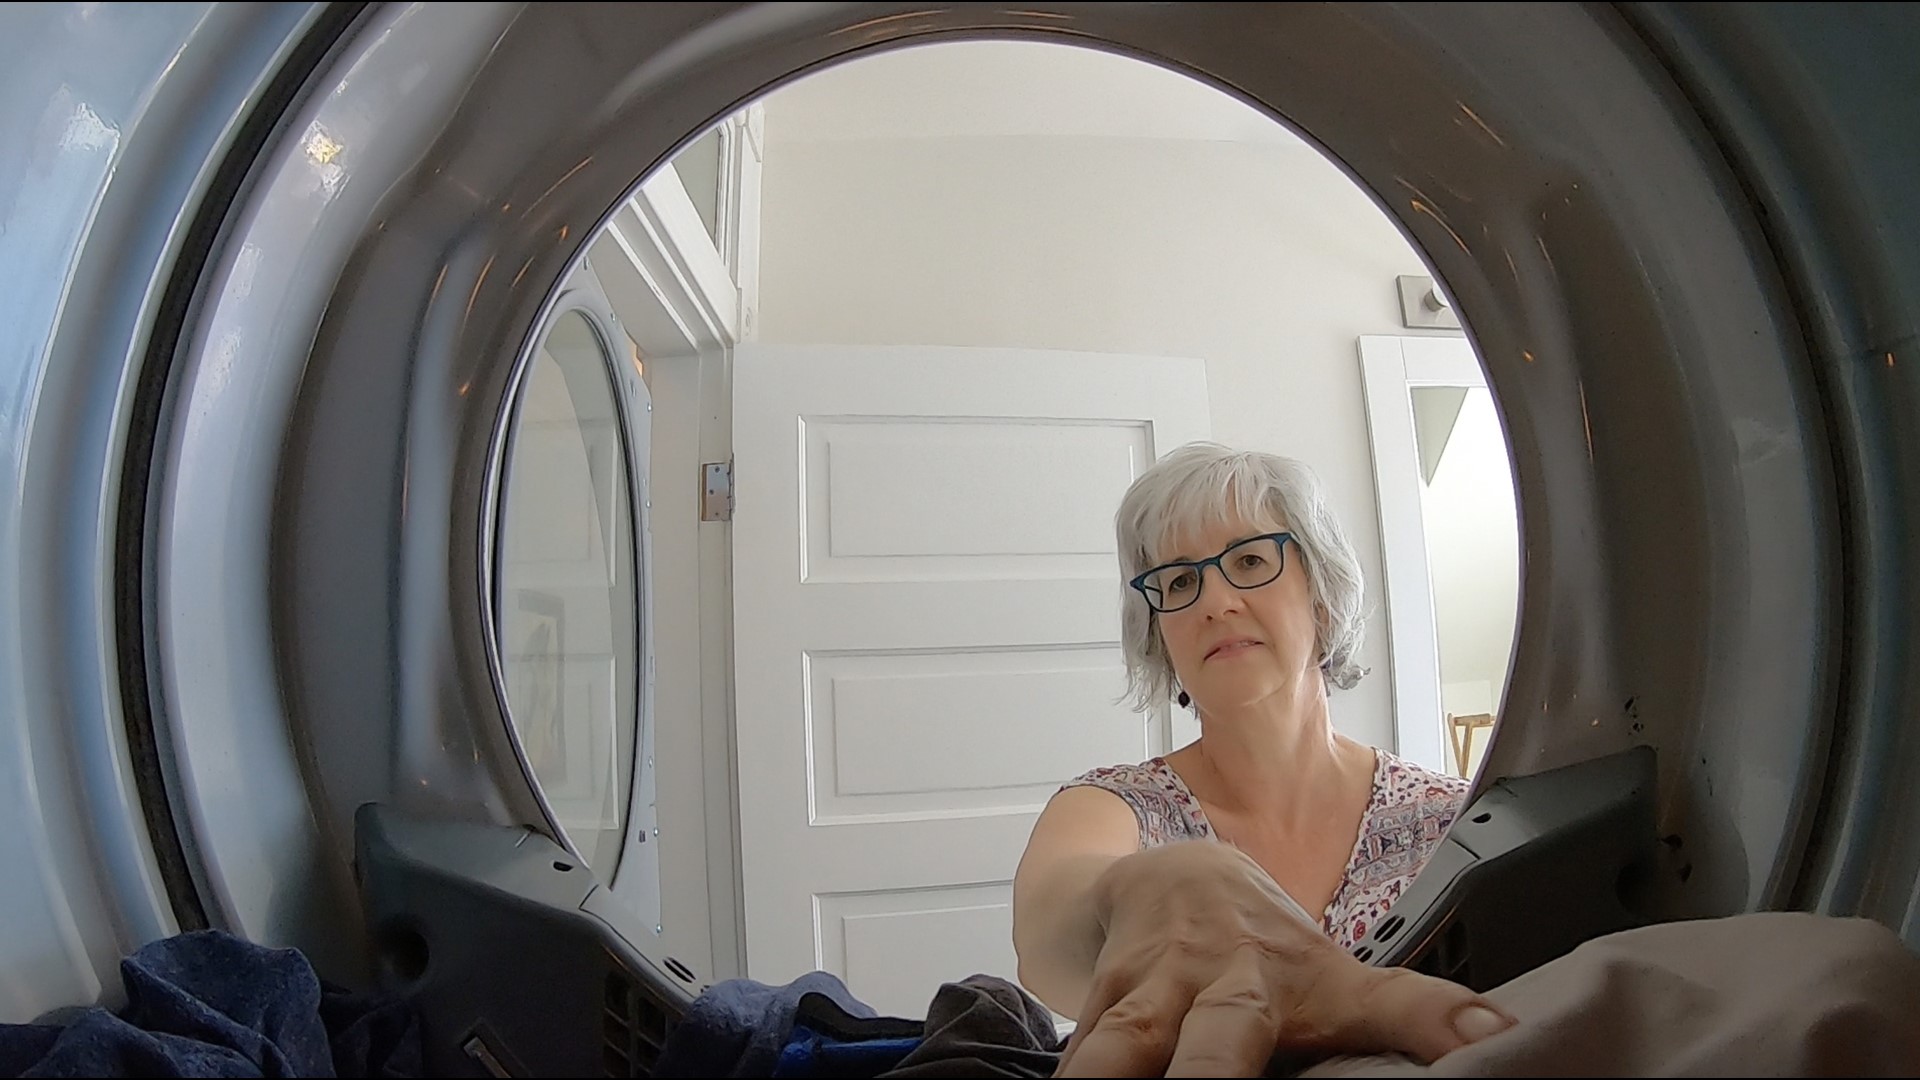 Seattle startup has been called "Uber for laundry." #k5evening